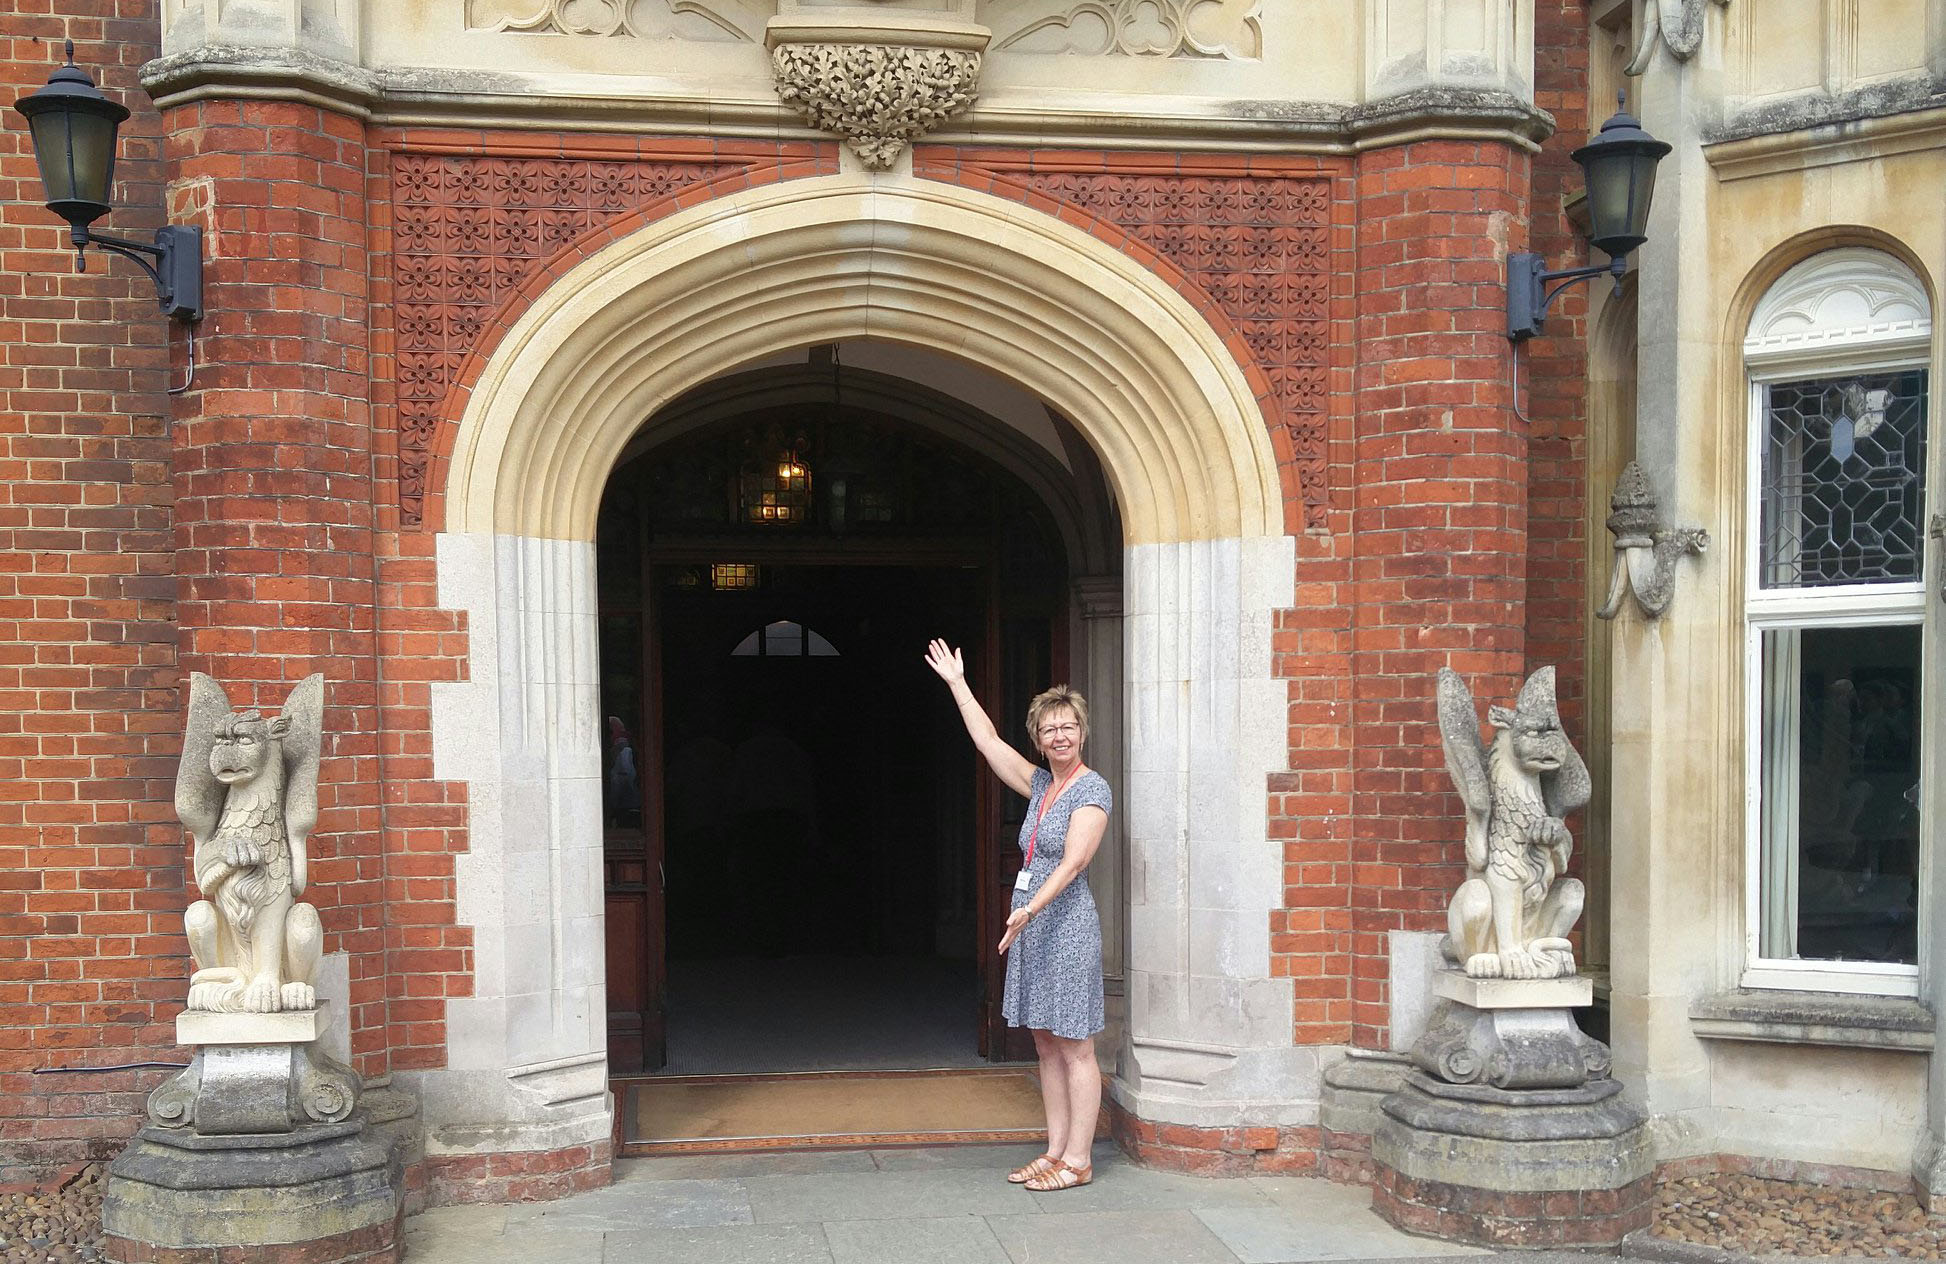 Julie Taplin standing with arms in a welcoming stance outside the entrance door to The Mansion, Bletchley Park, July 2019